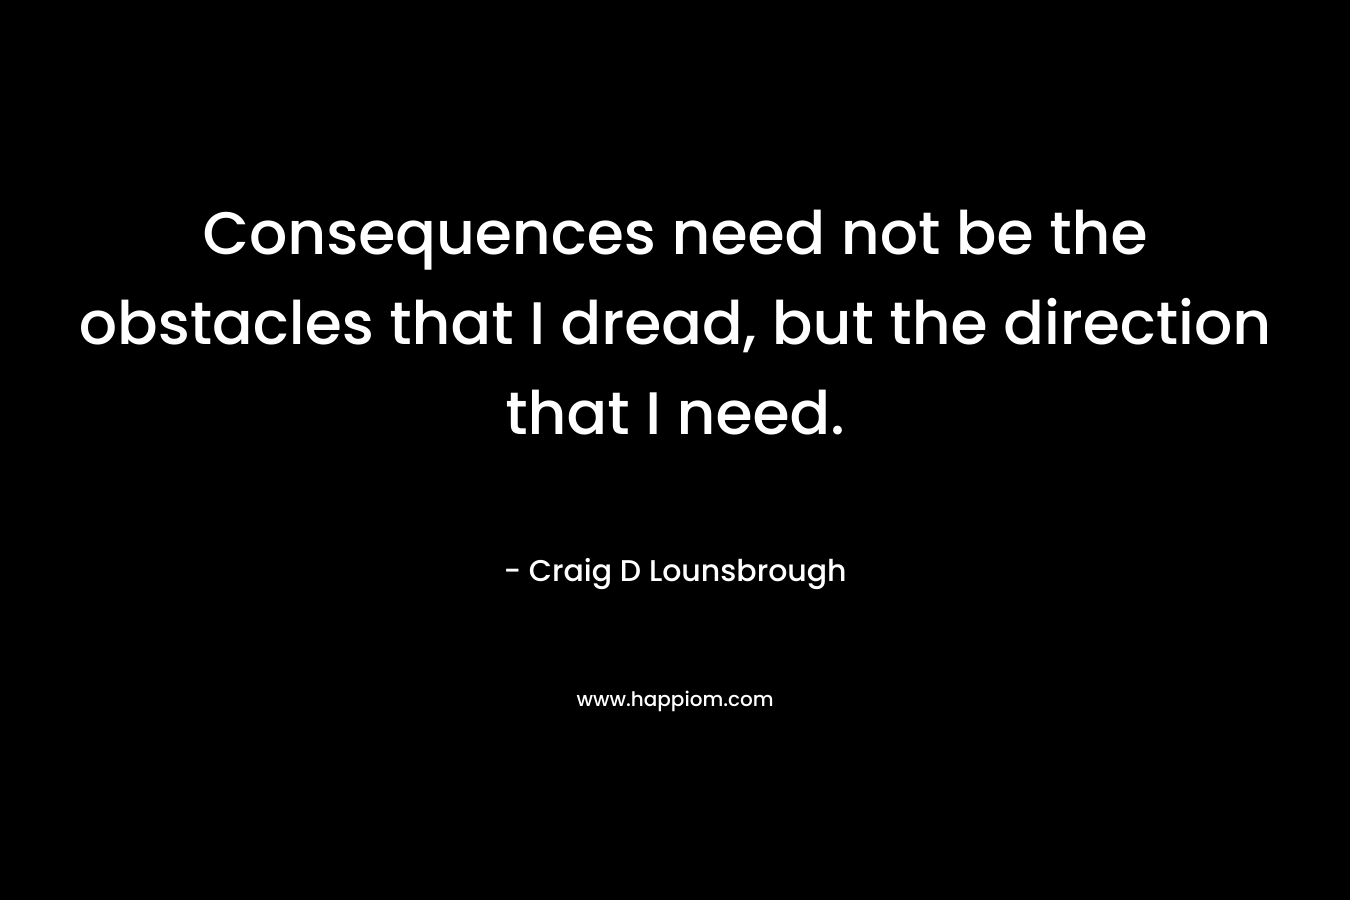 Consequences need not be the obstacles that I dread, but the direction that I need. – Craig D Lounsbrough